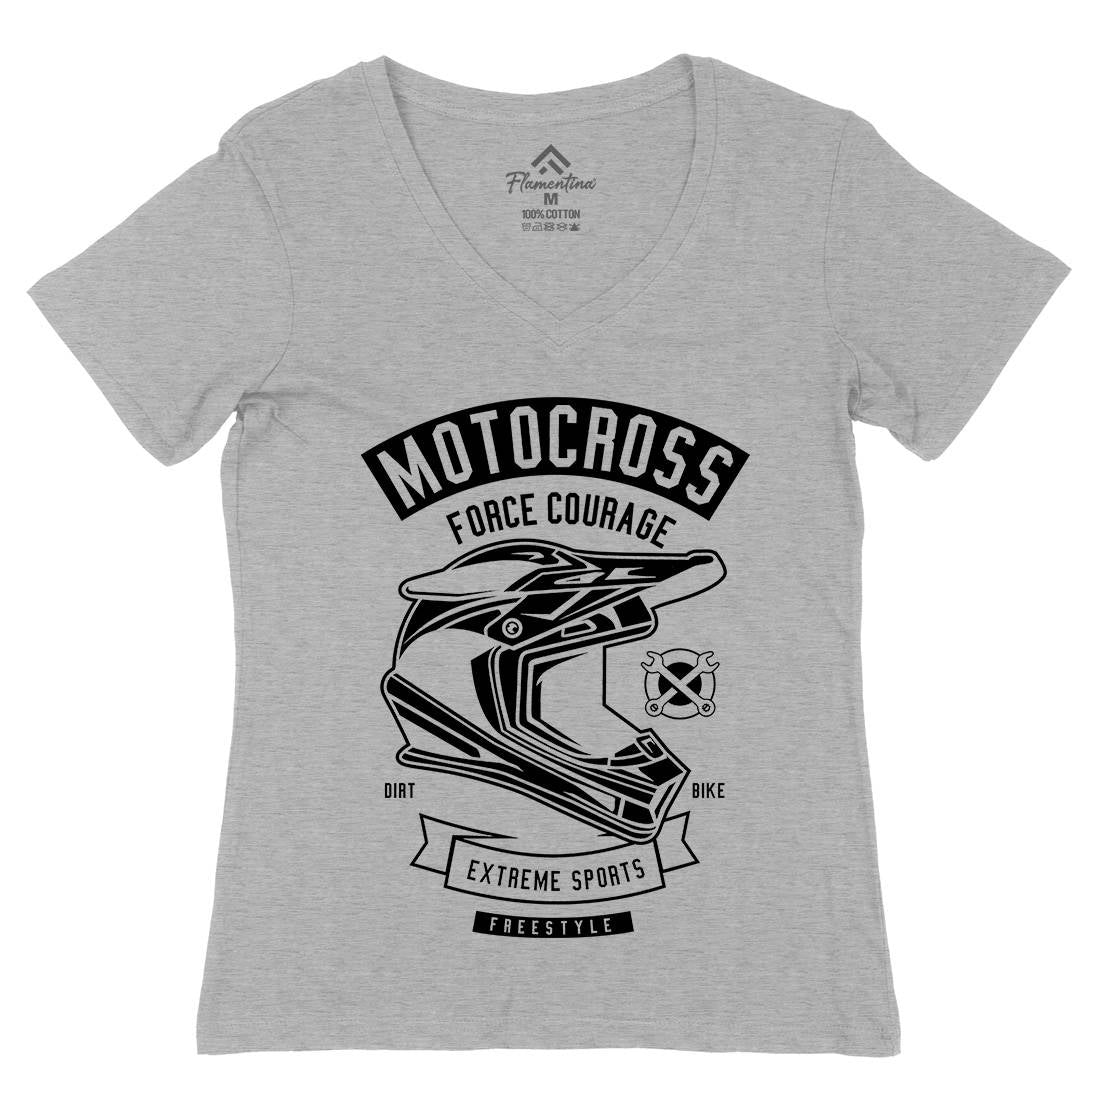 Motocross Force Courage Womens Organic V-Neck T-Shirt Motorcycles B576